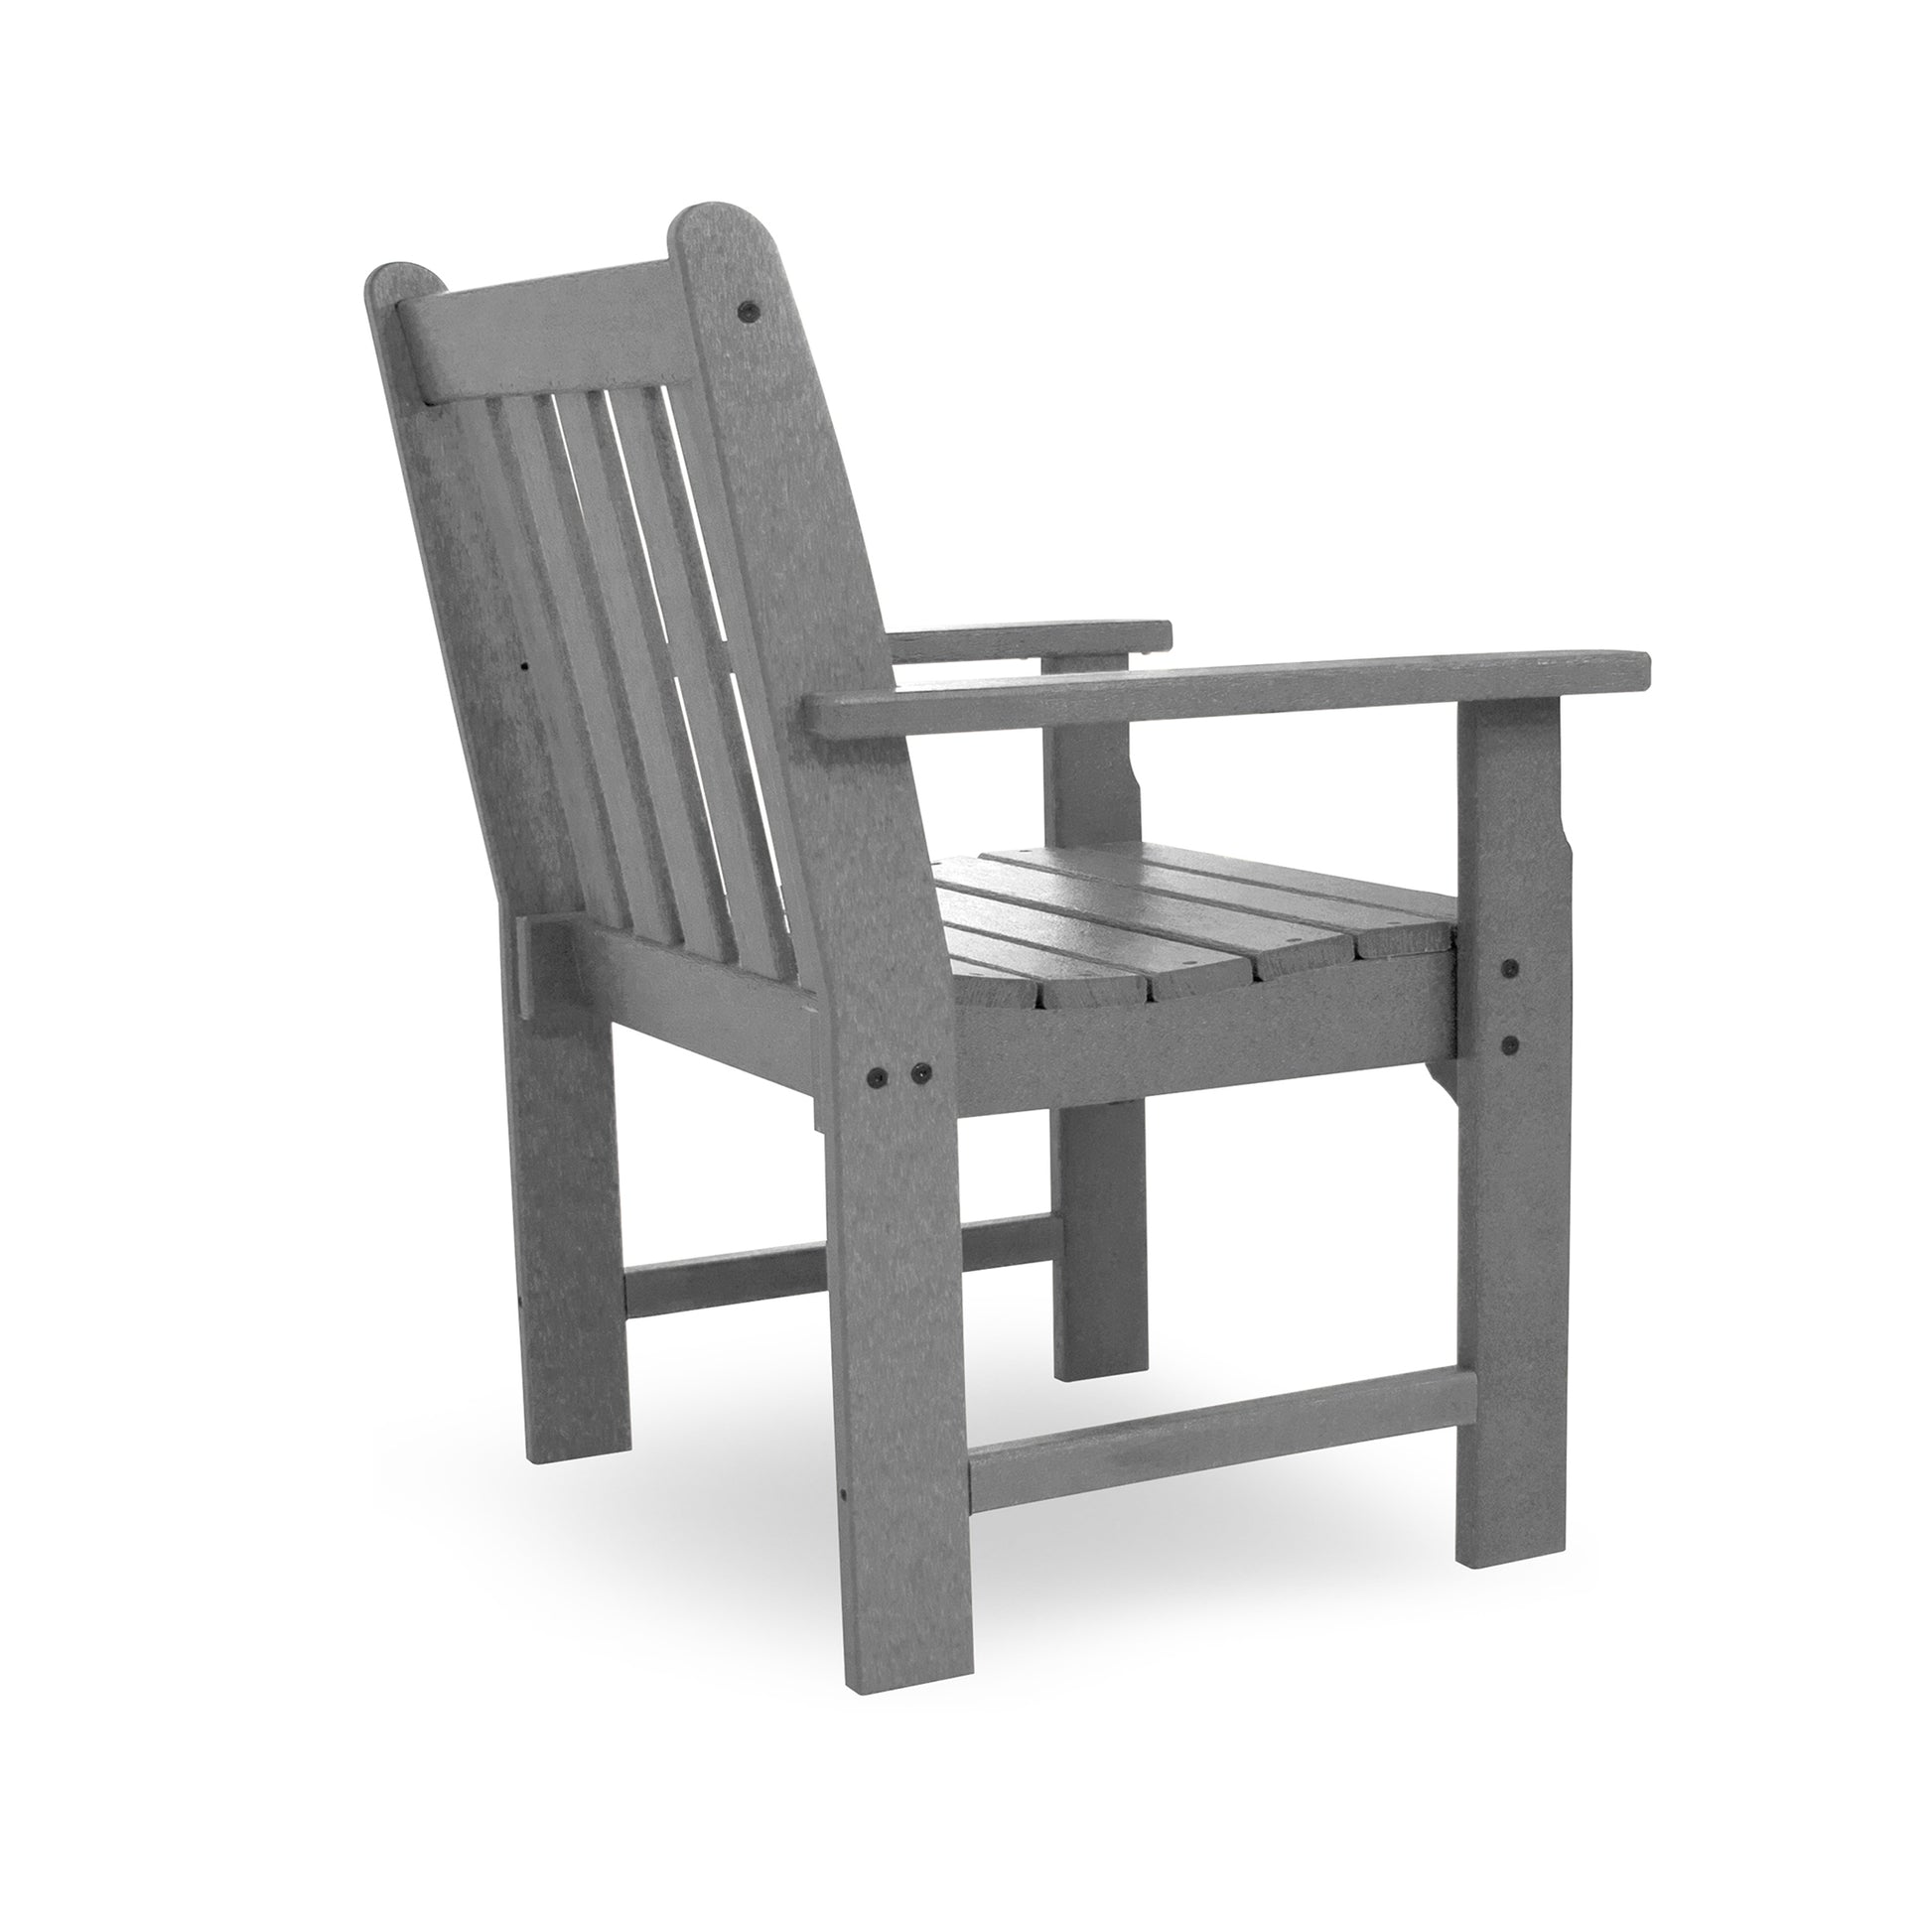 A single gray POLYWOOD® Vineyard Arm Chair, made of recycled plastic, featuring a slatted back and seat with a wide armrest, isolated on a white background.